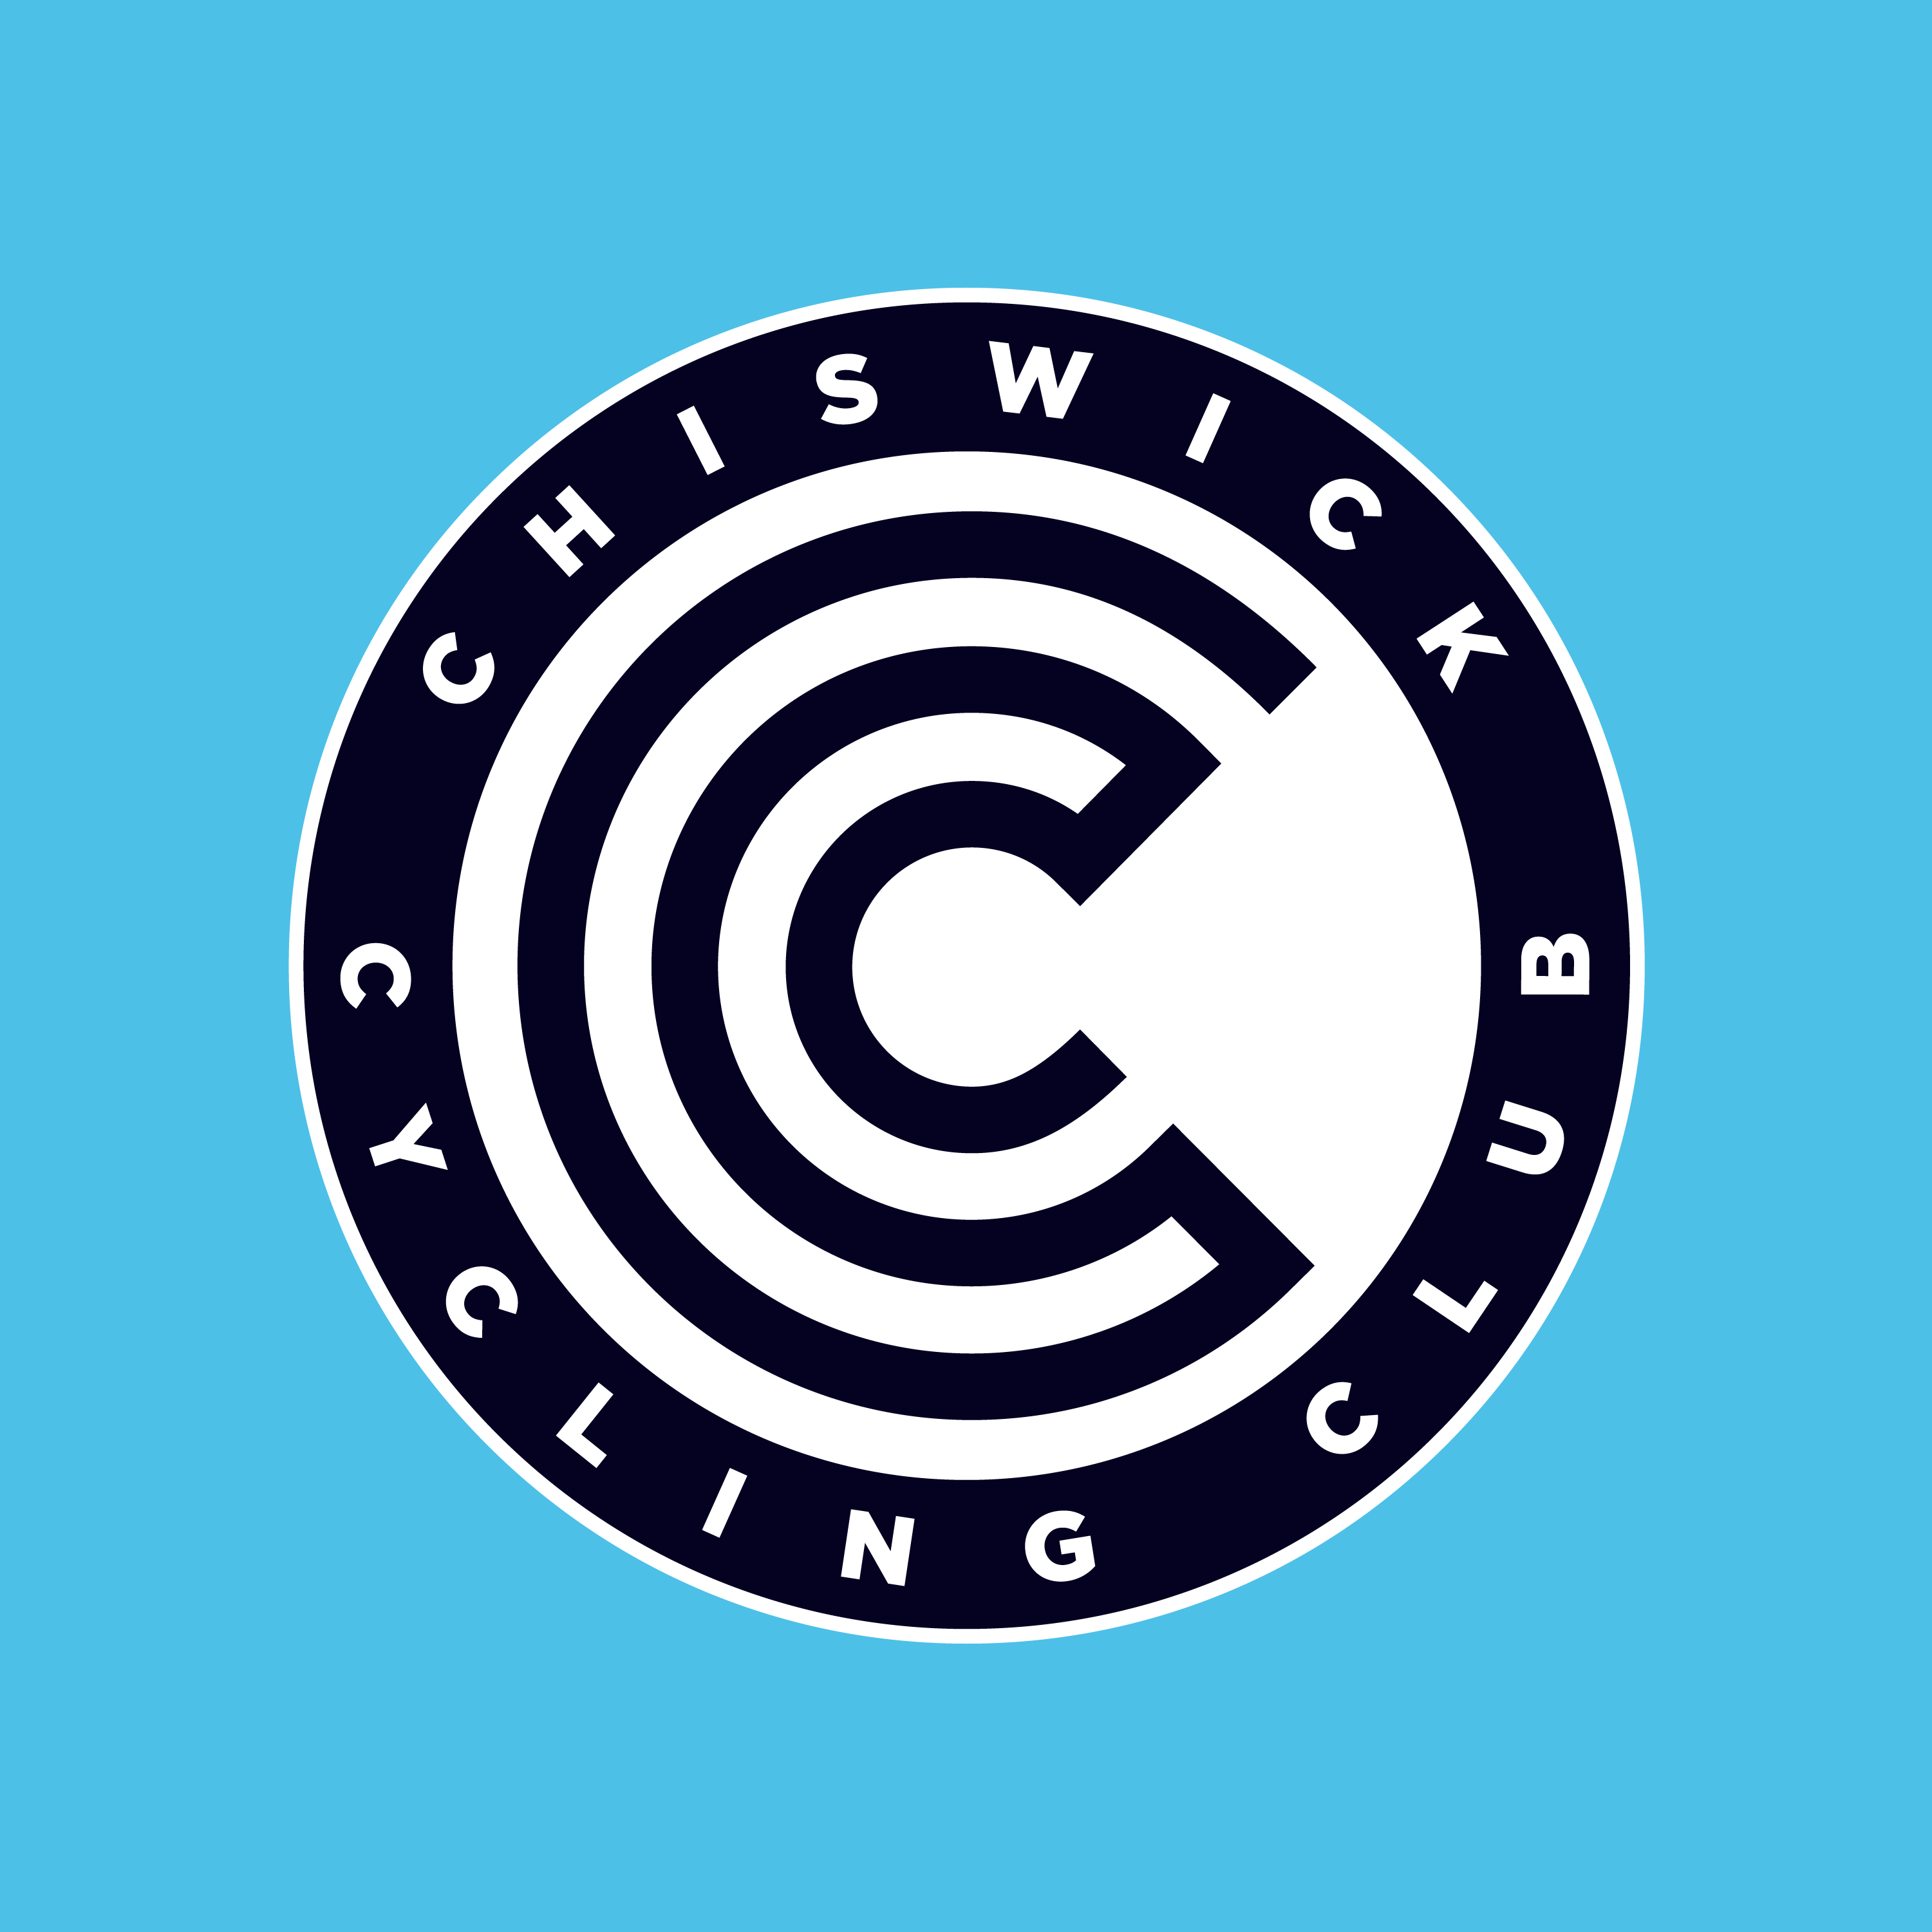 Club Image for CHISWICK CYCLING CLUB